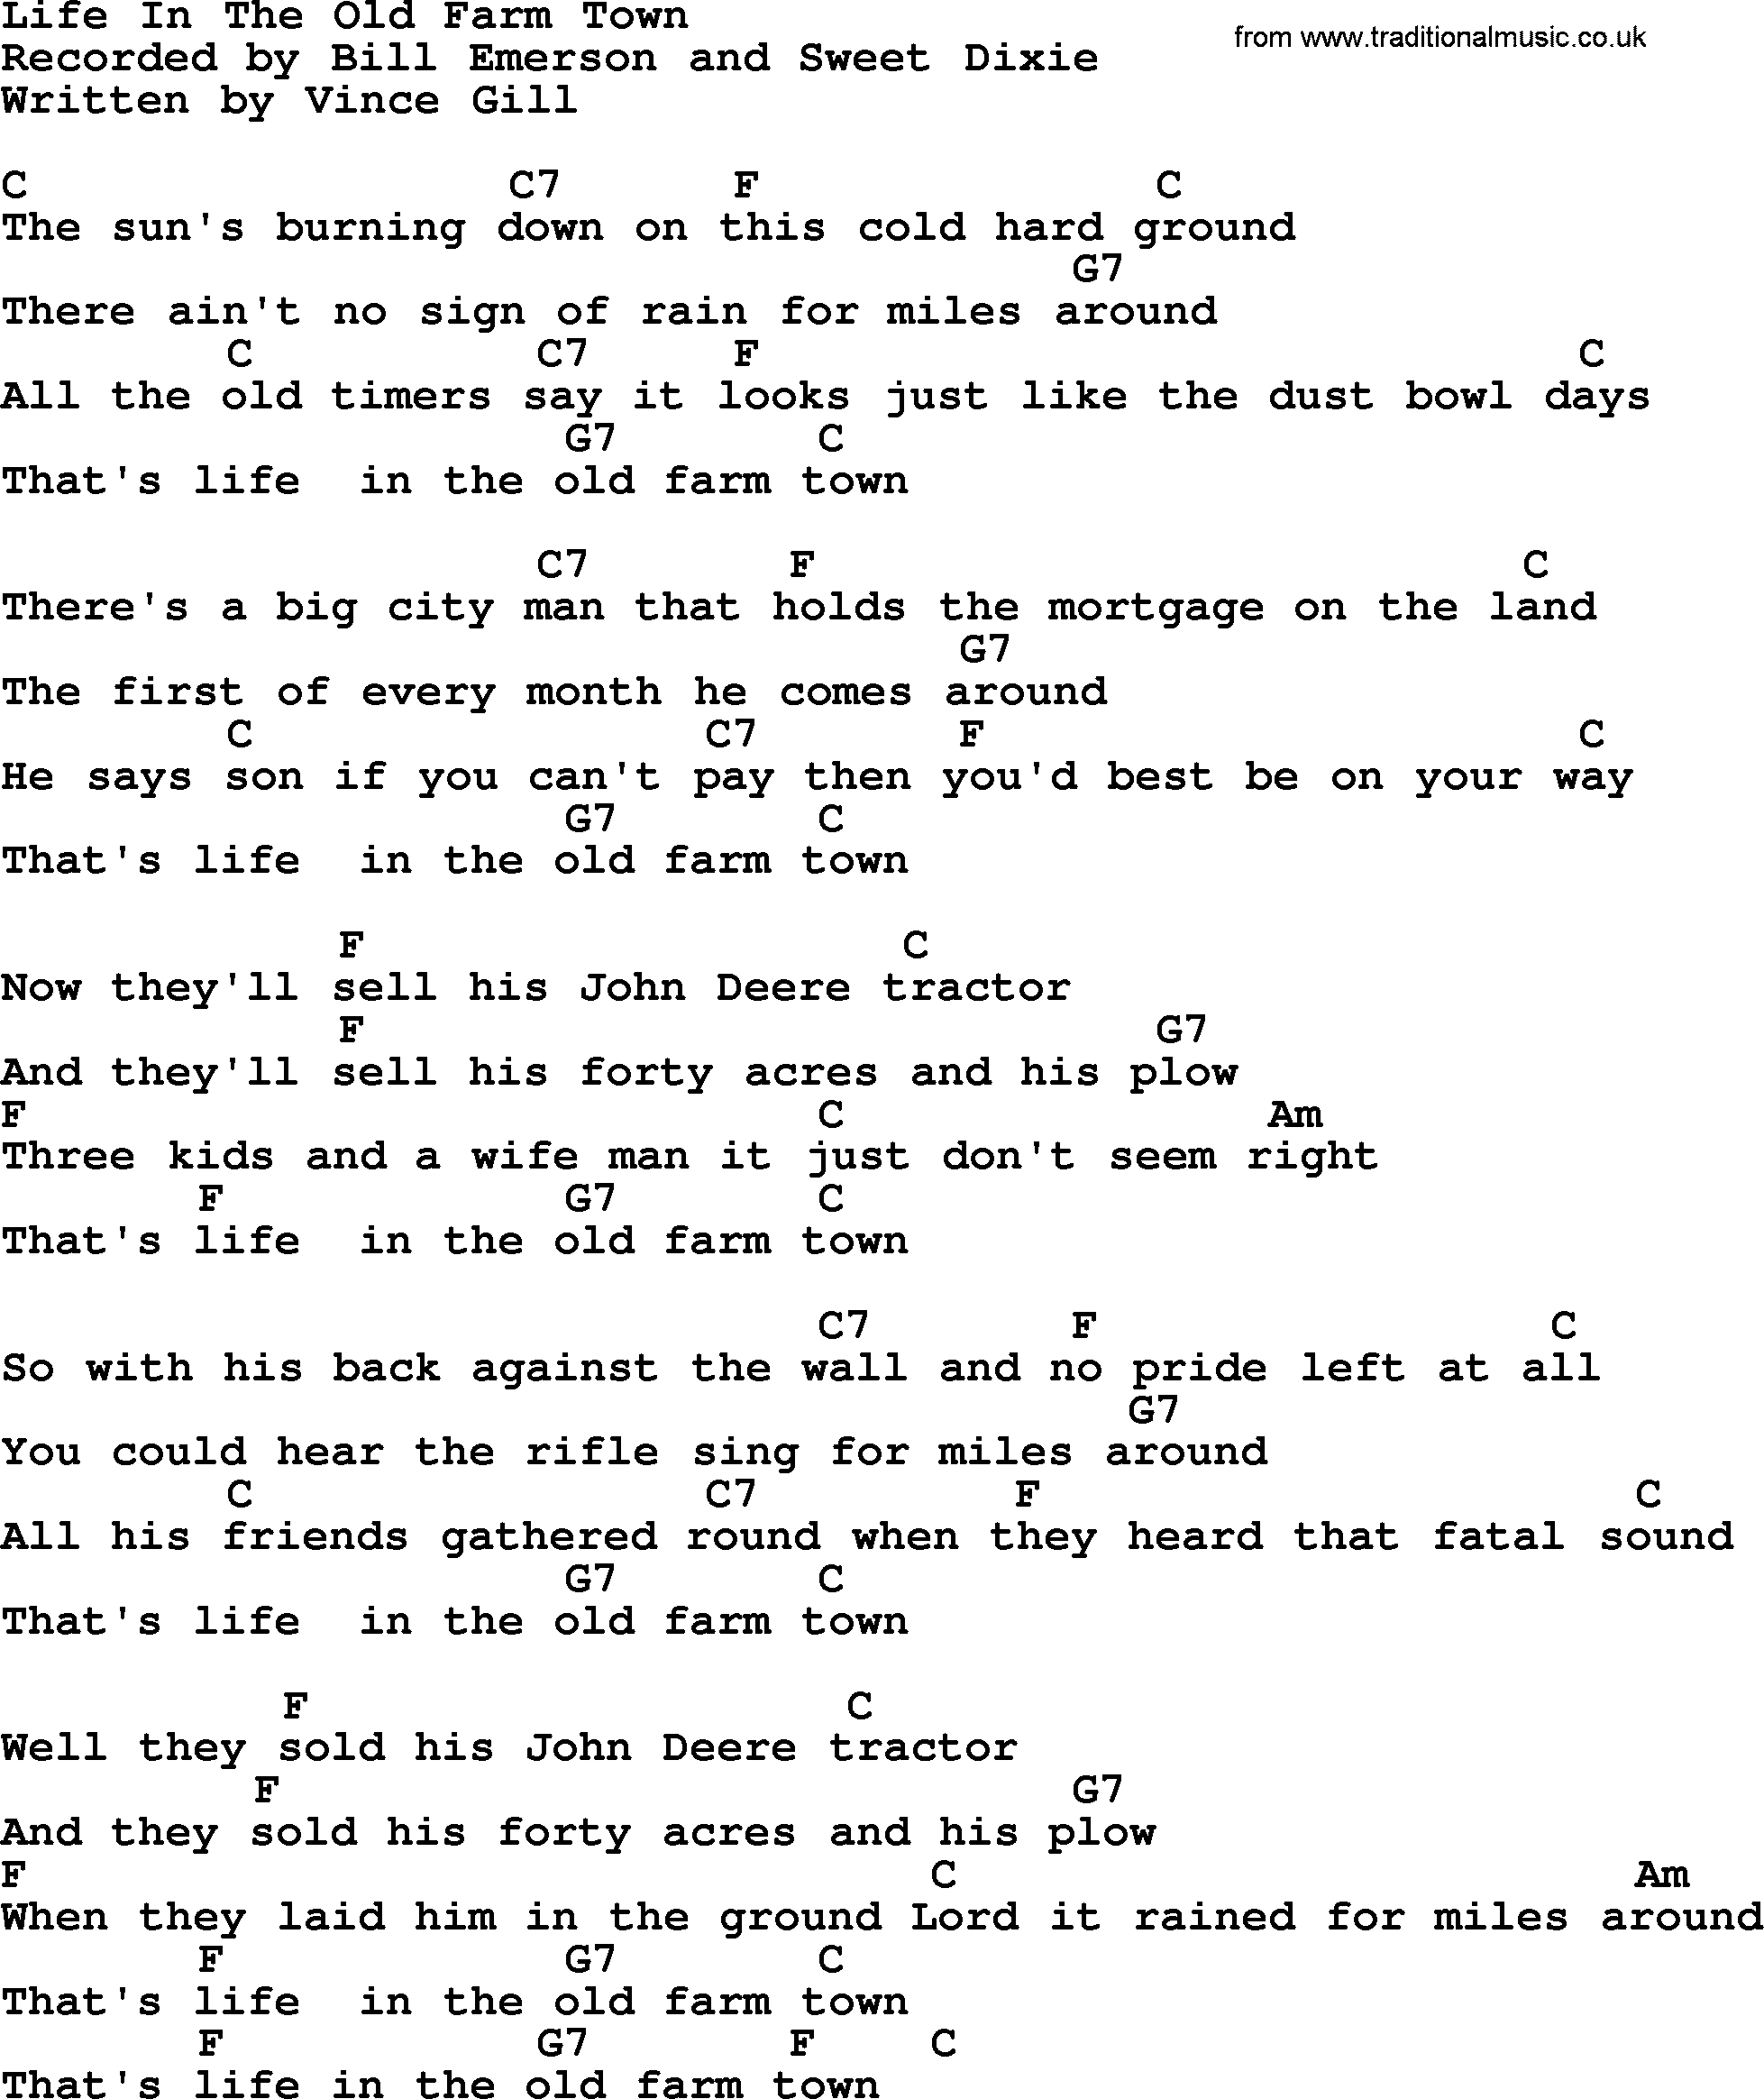 Bluegrass song: Life In The Old Farm Town, lyrics and chords